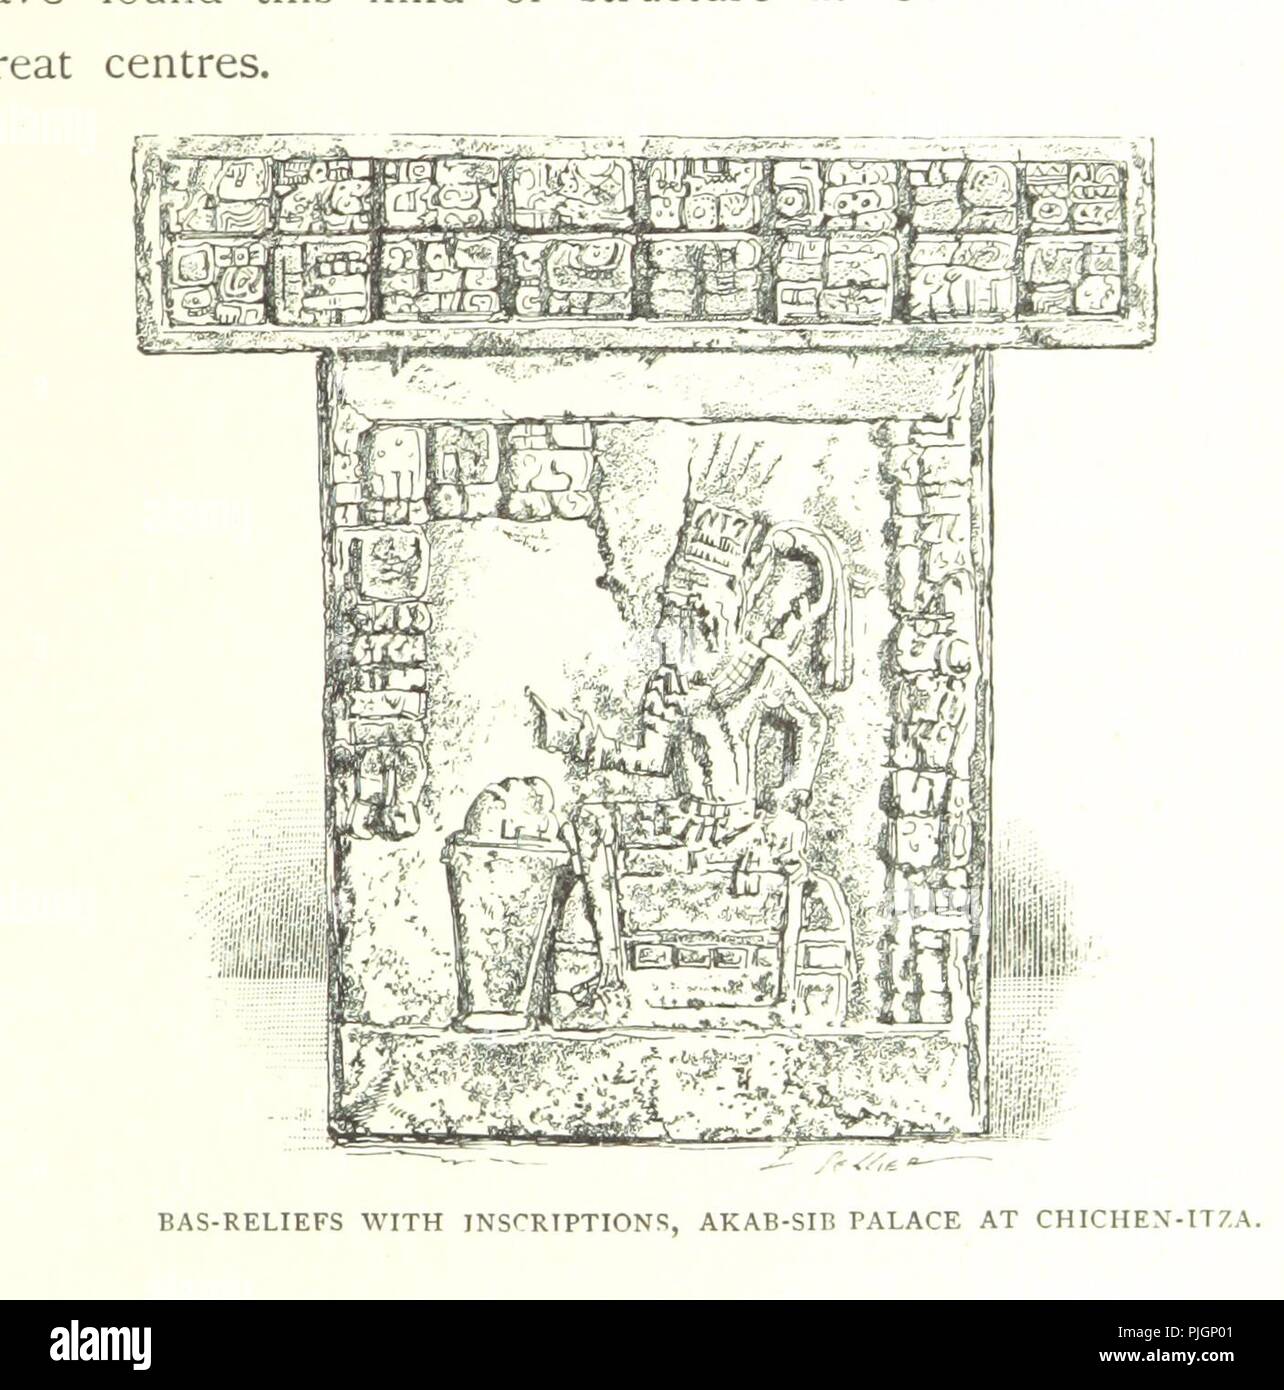 Image  from page 407 of '[The Ancient Cities of the New World. Being travels and explorations in Mexico and Central America from 1857-1882 . With numerous illustrations. Translated from the French [and abridged] by J. Gonin0037. Stock Photo